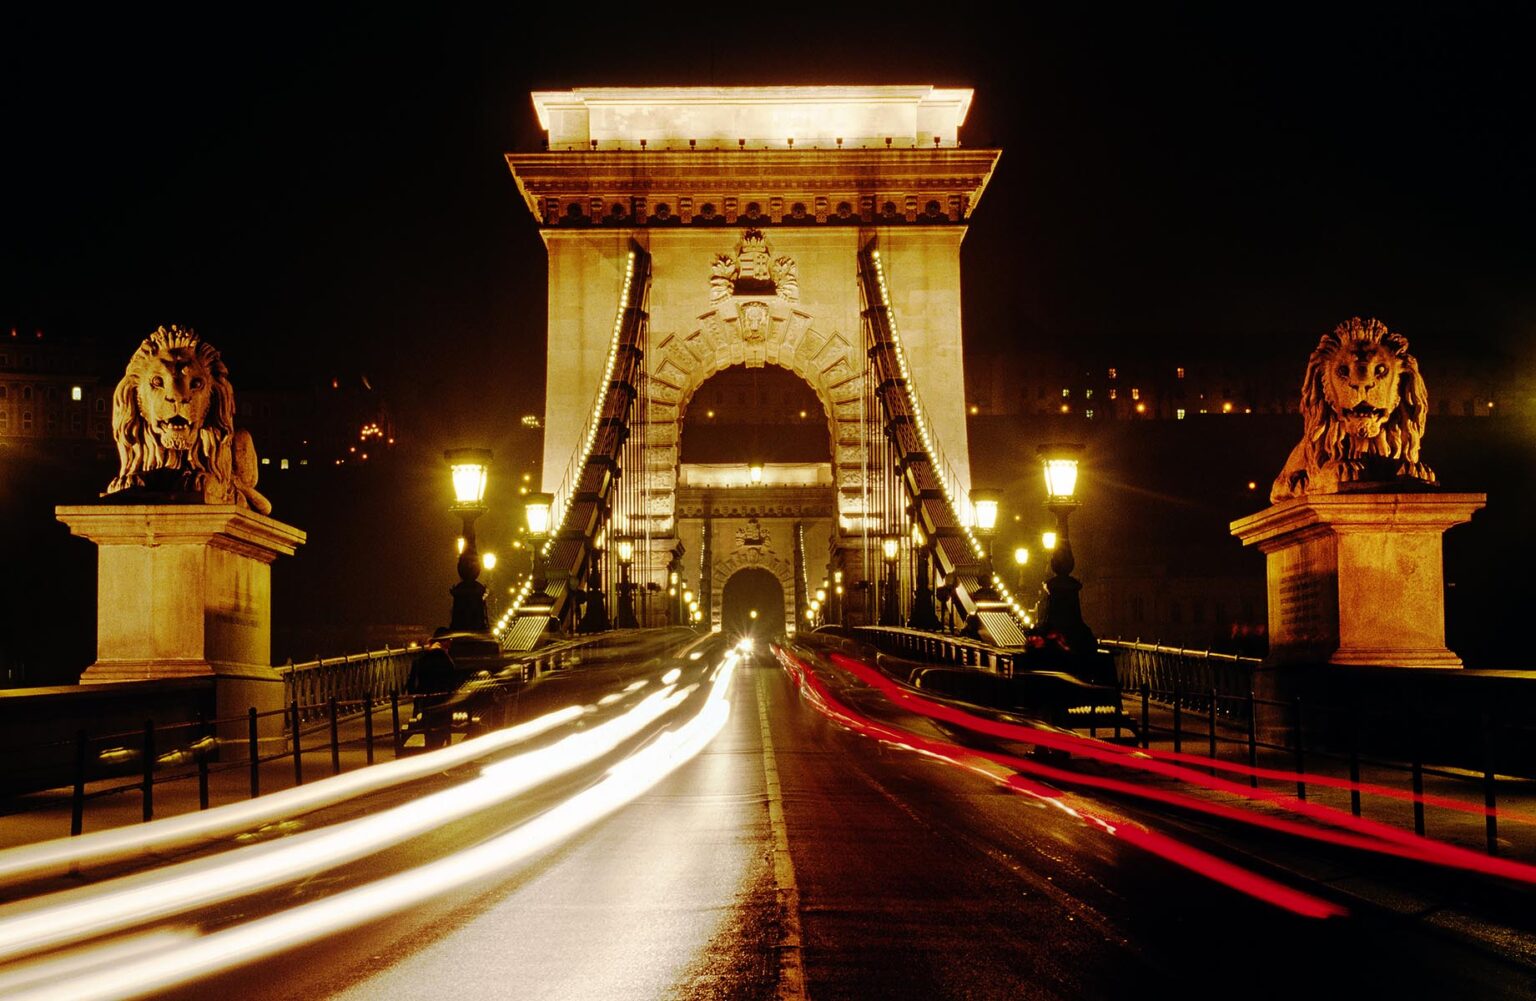 Night shot of the CHAIN BRIDGE completed in 1849 (first bridge to connect Buda to Pest) - BUDAPEST